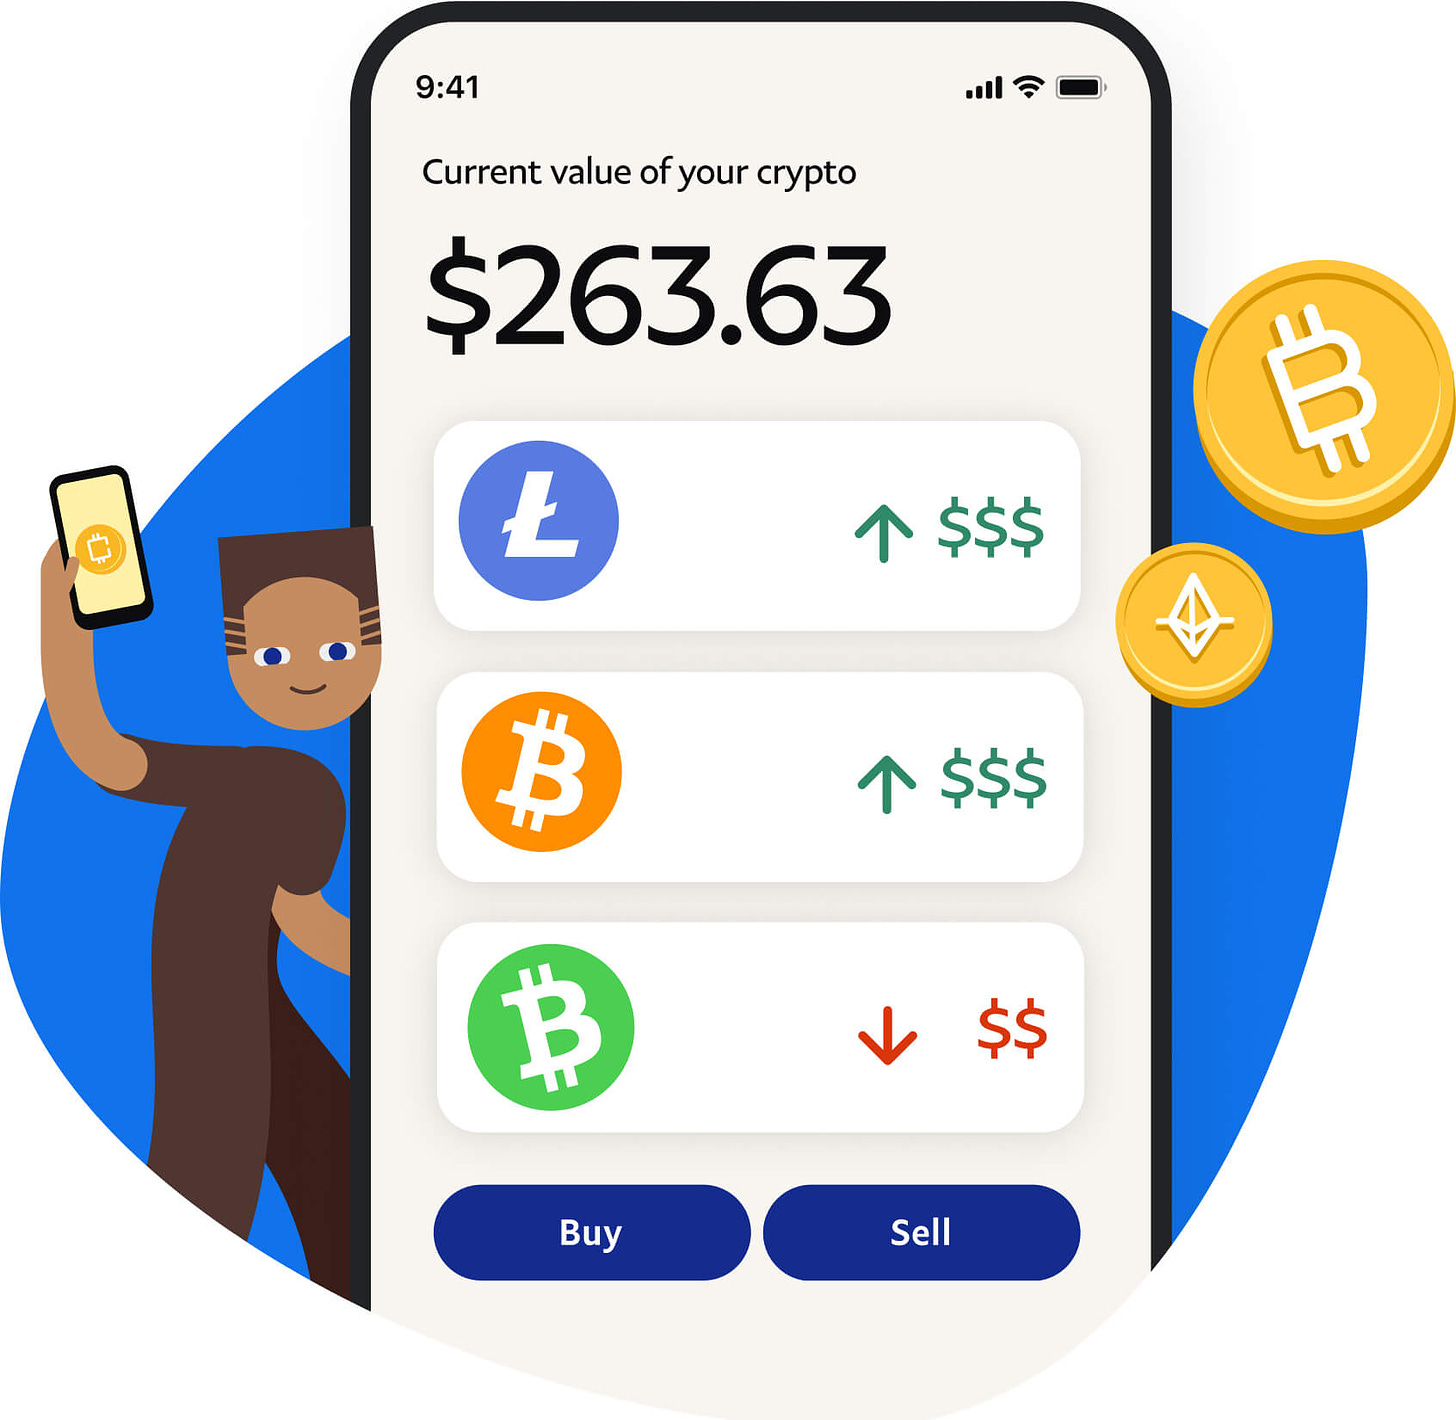 PayPal App image showing crypto buy and sell options